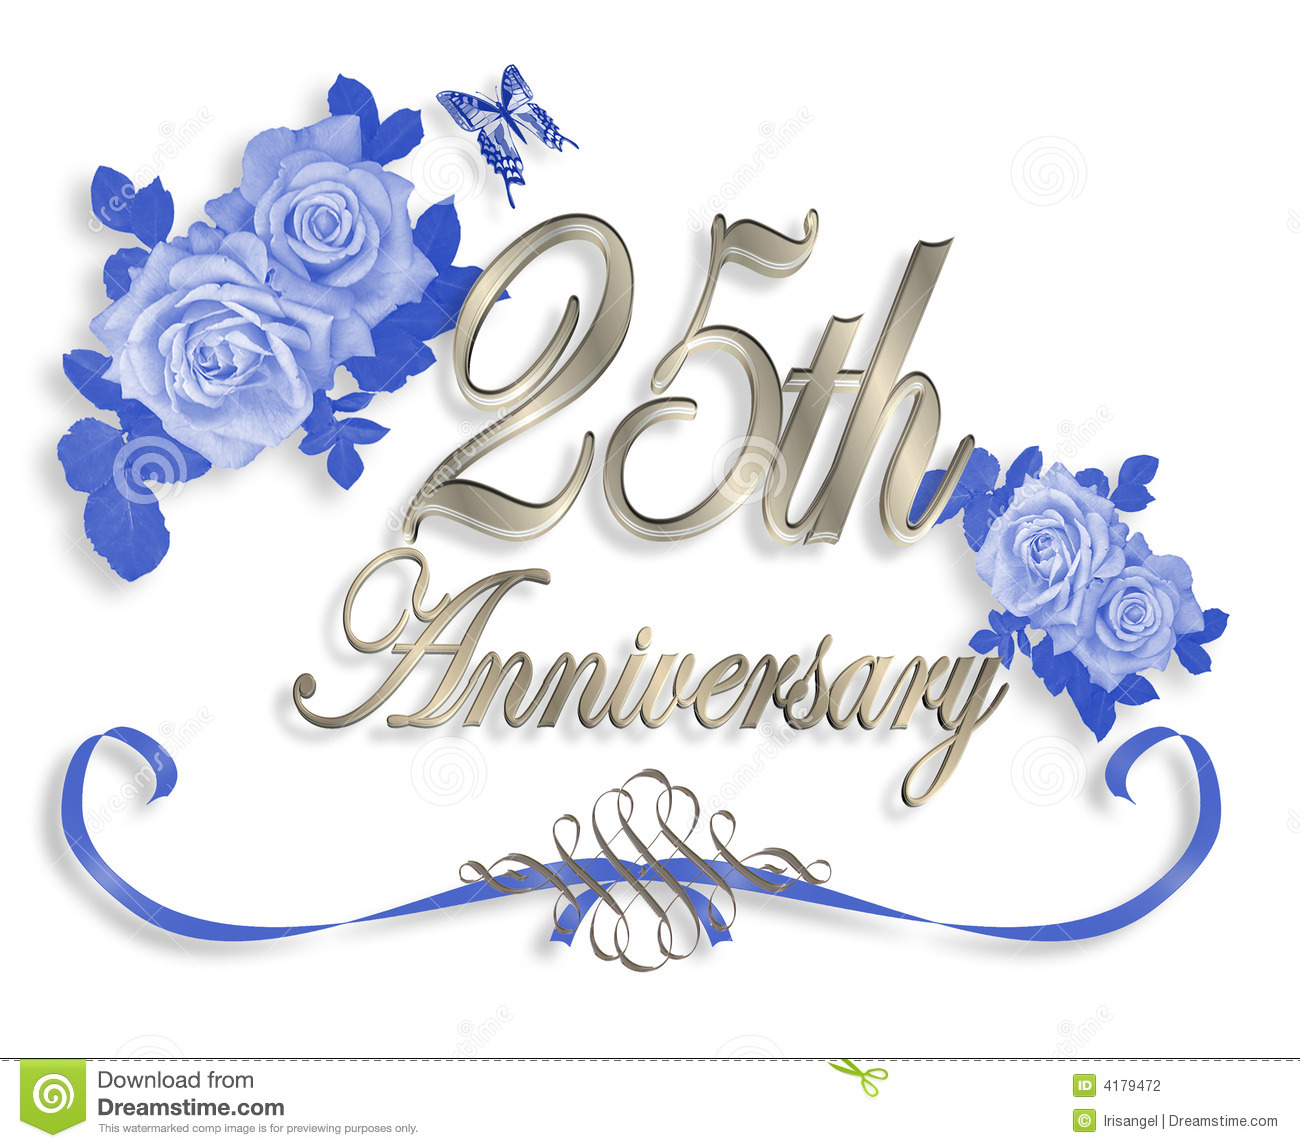 silver-wedding-anniversary-clipart-20-free-cliparts-download-images